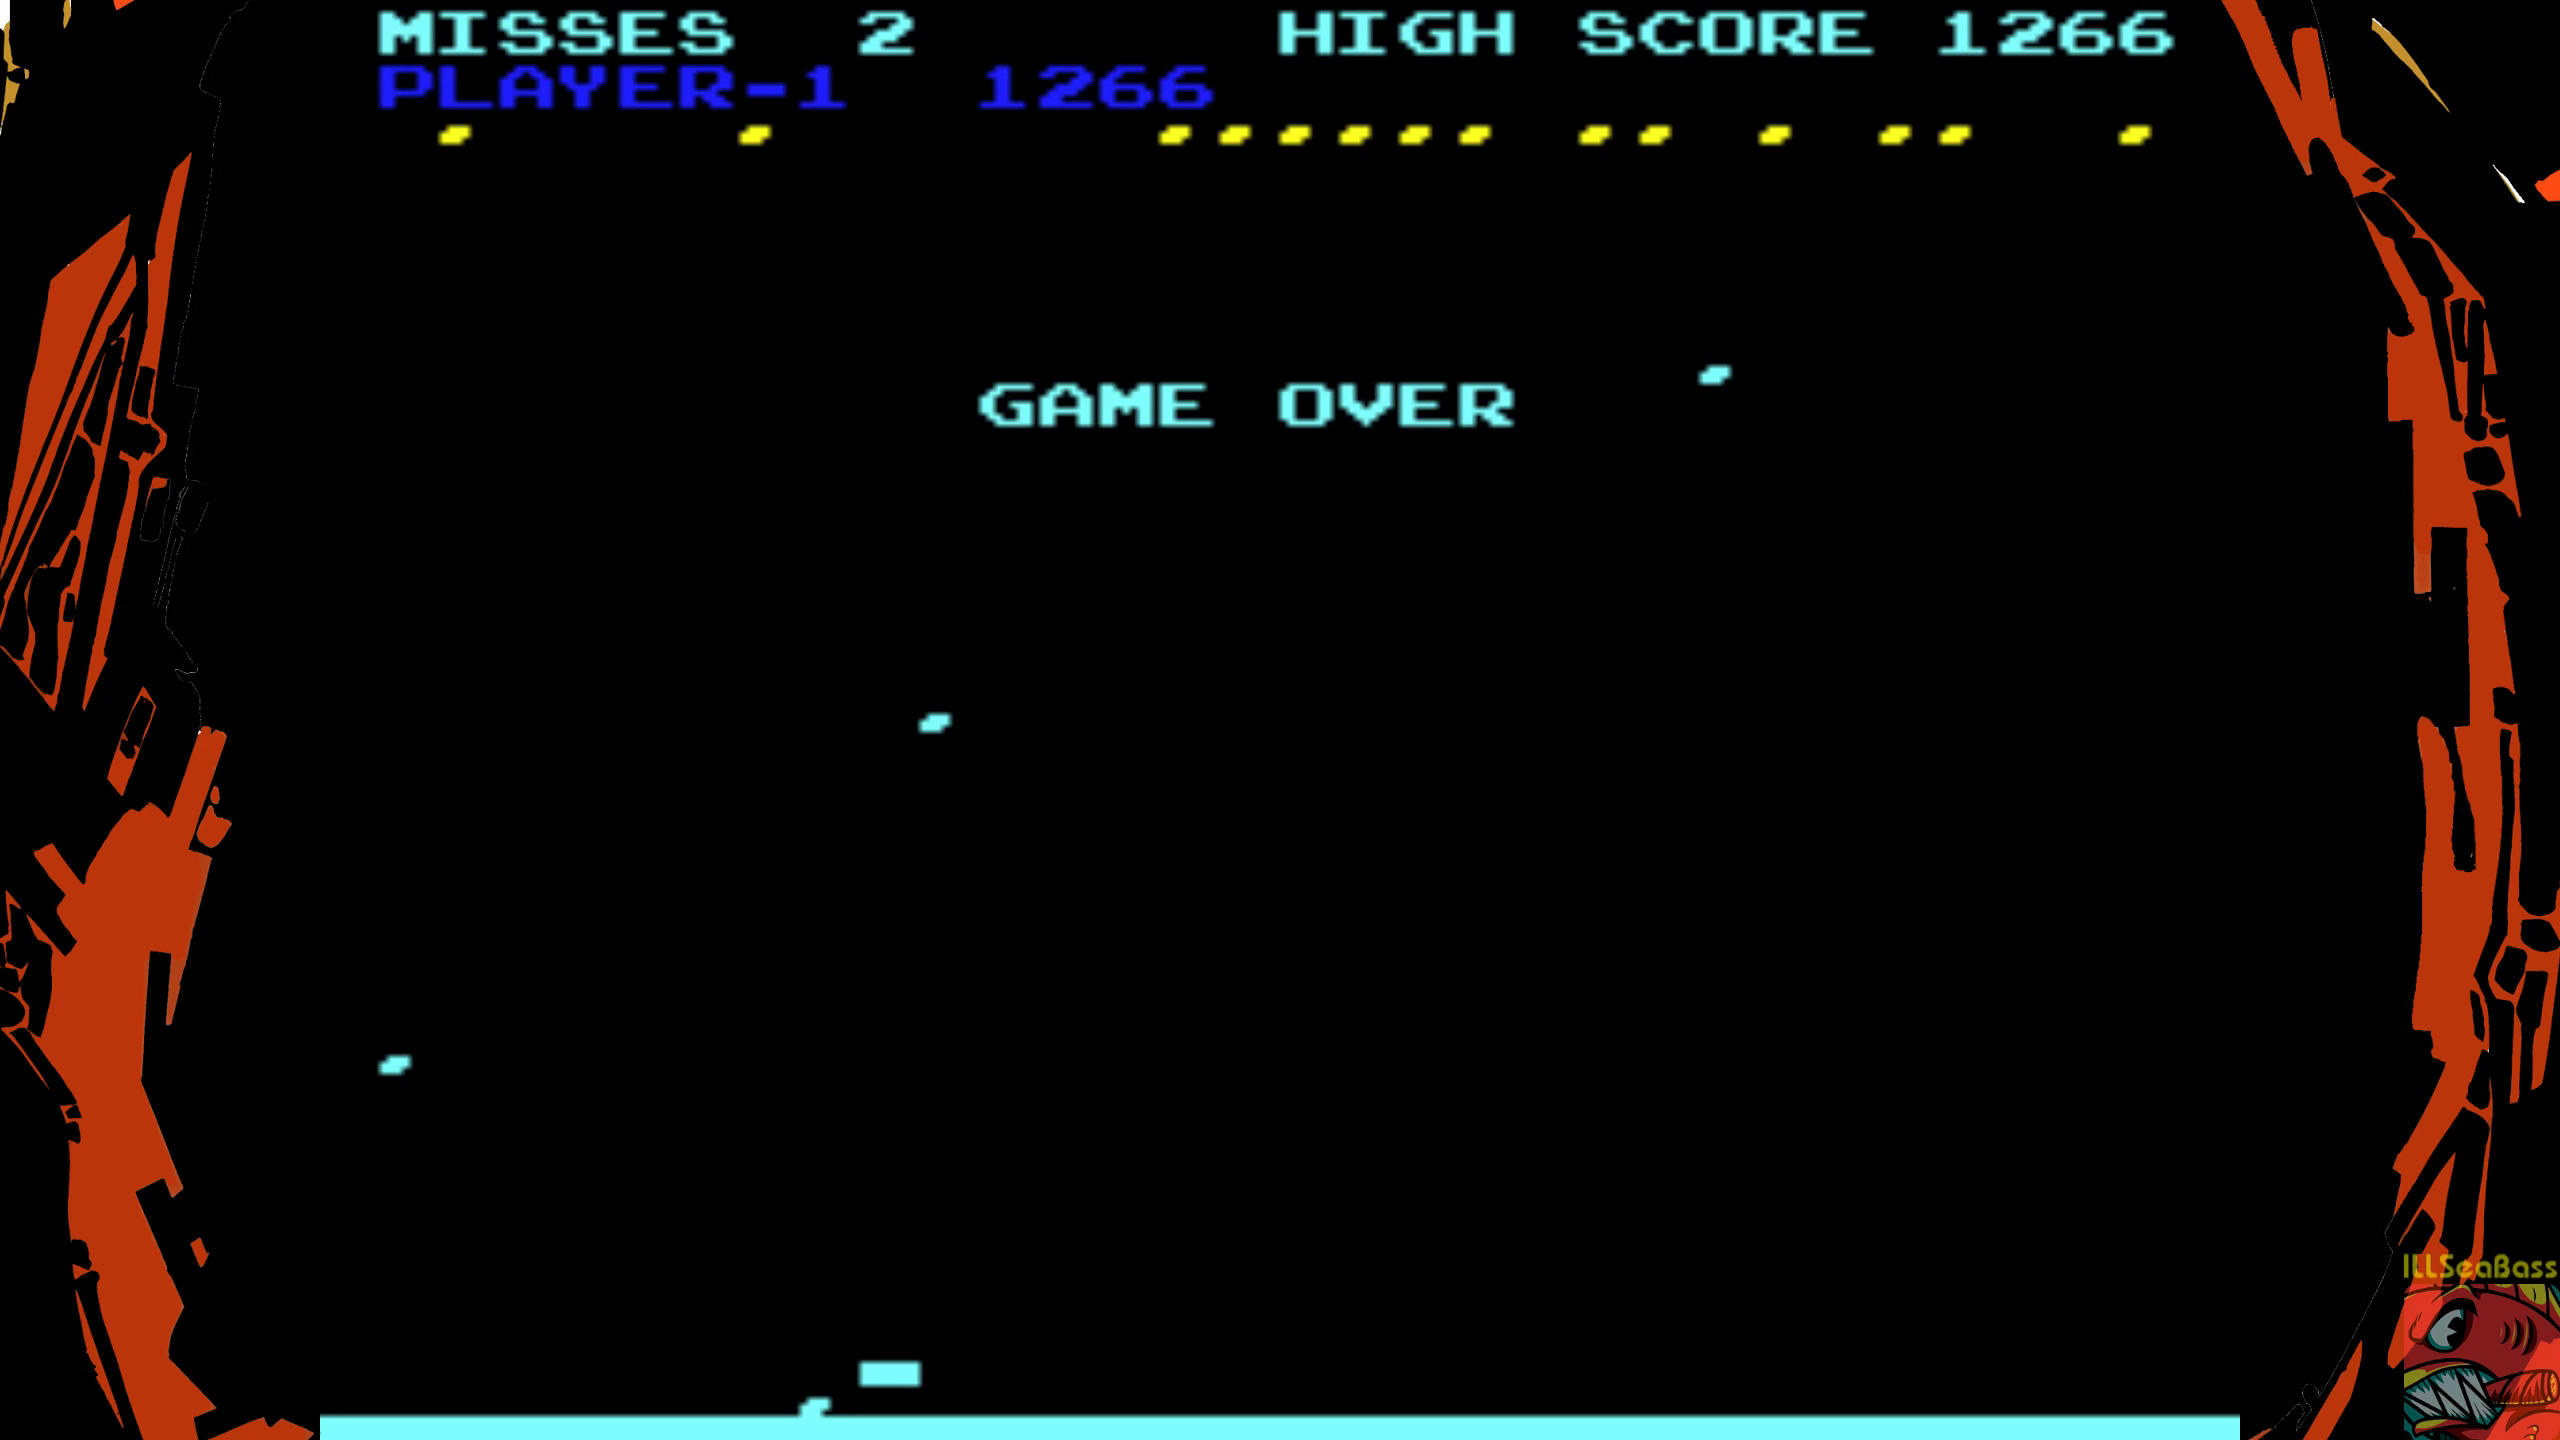 ILLSeaBass: Avalanche (Arcade Emulated / M.A.M.E.) 1,266 points on 2019-05-14 16:41:49